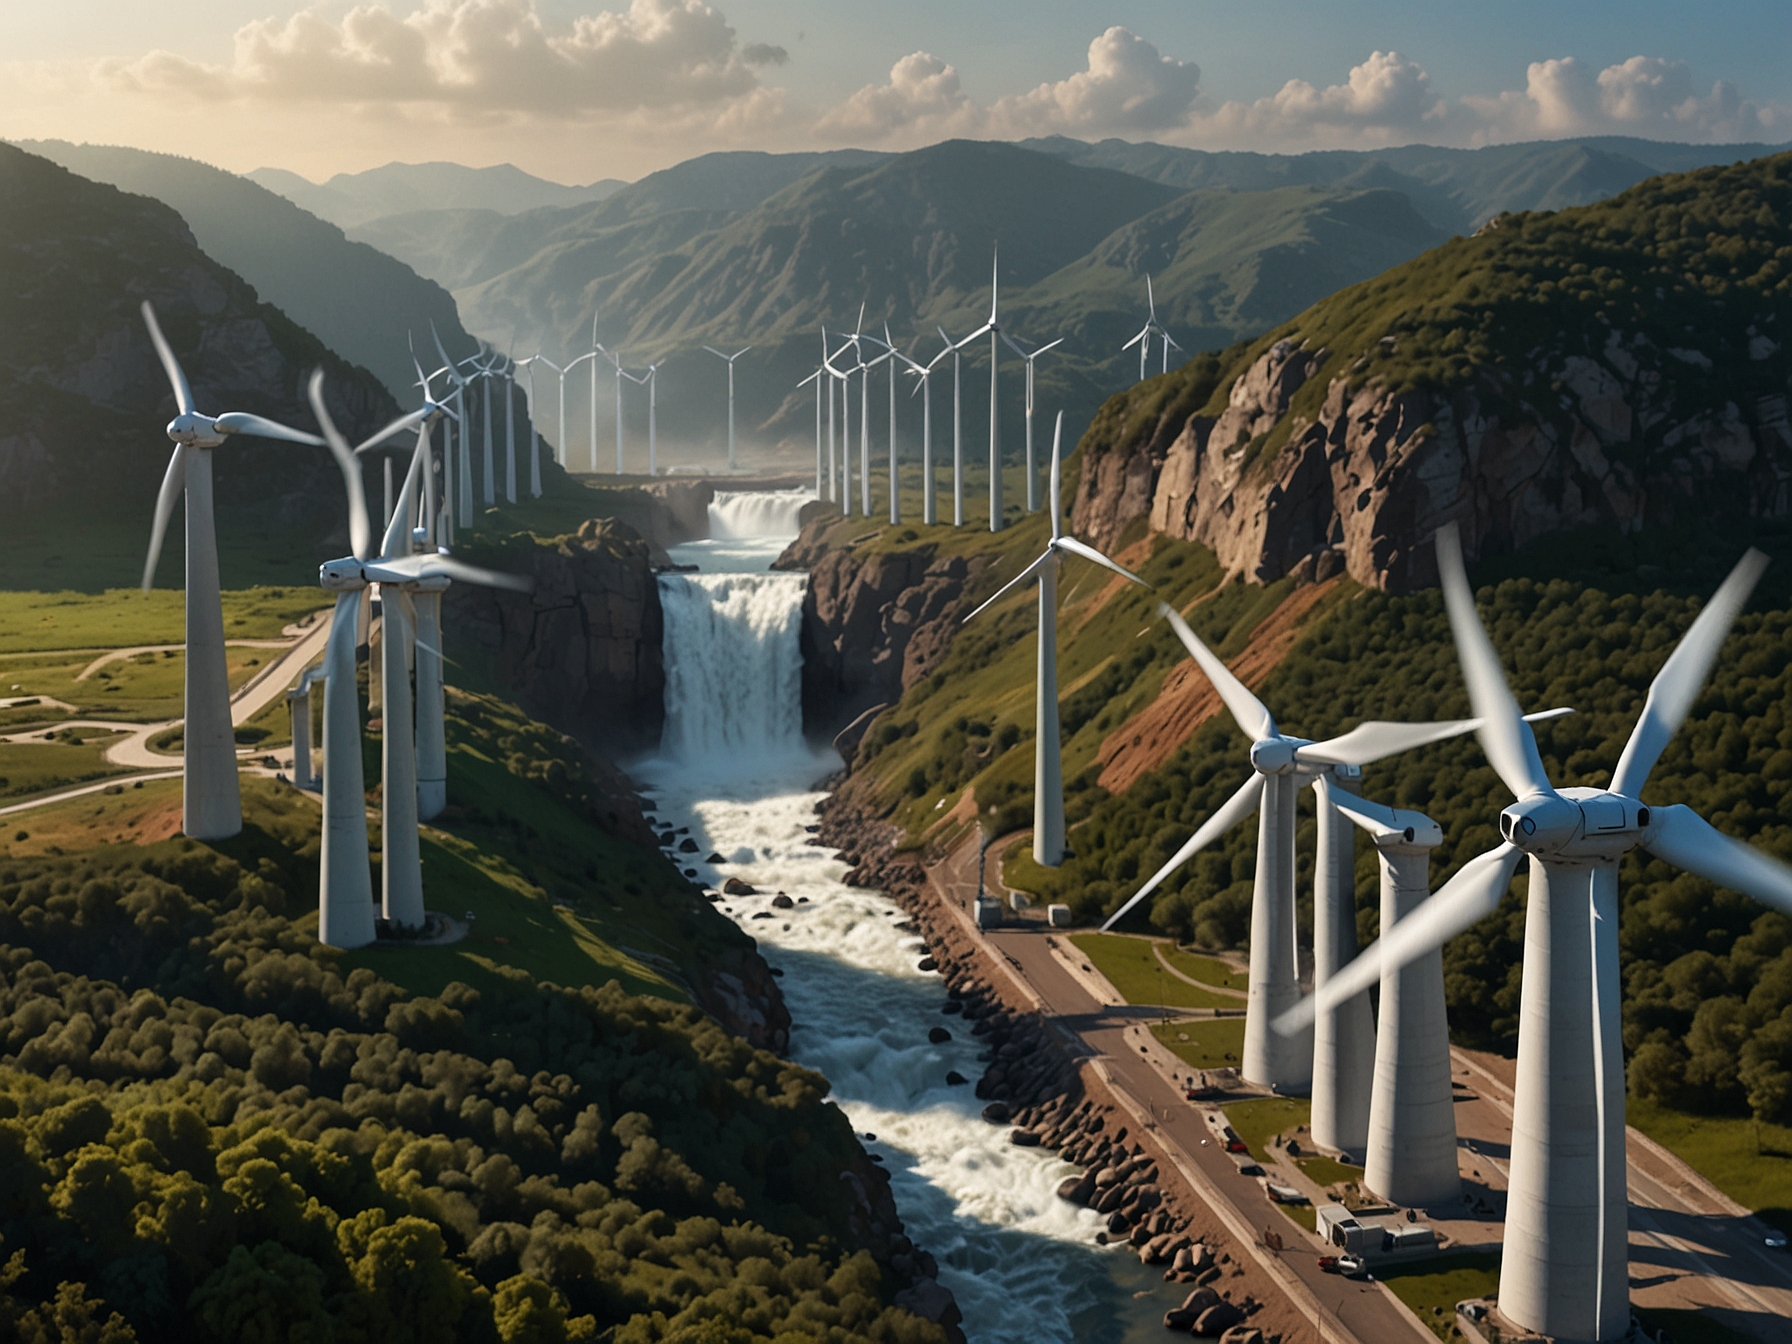 A visual representation of SJVN Ltd's diverse energy portfolio, including hydroelectric, thermal, and wind energy projects, showcasing the company's wide-ranging involvement in the power sector.